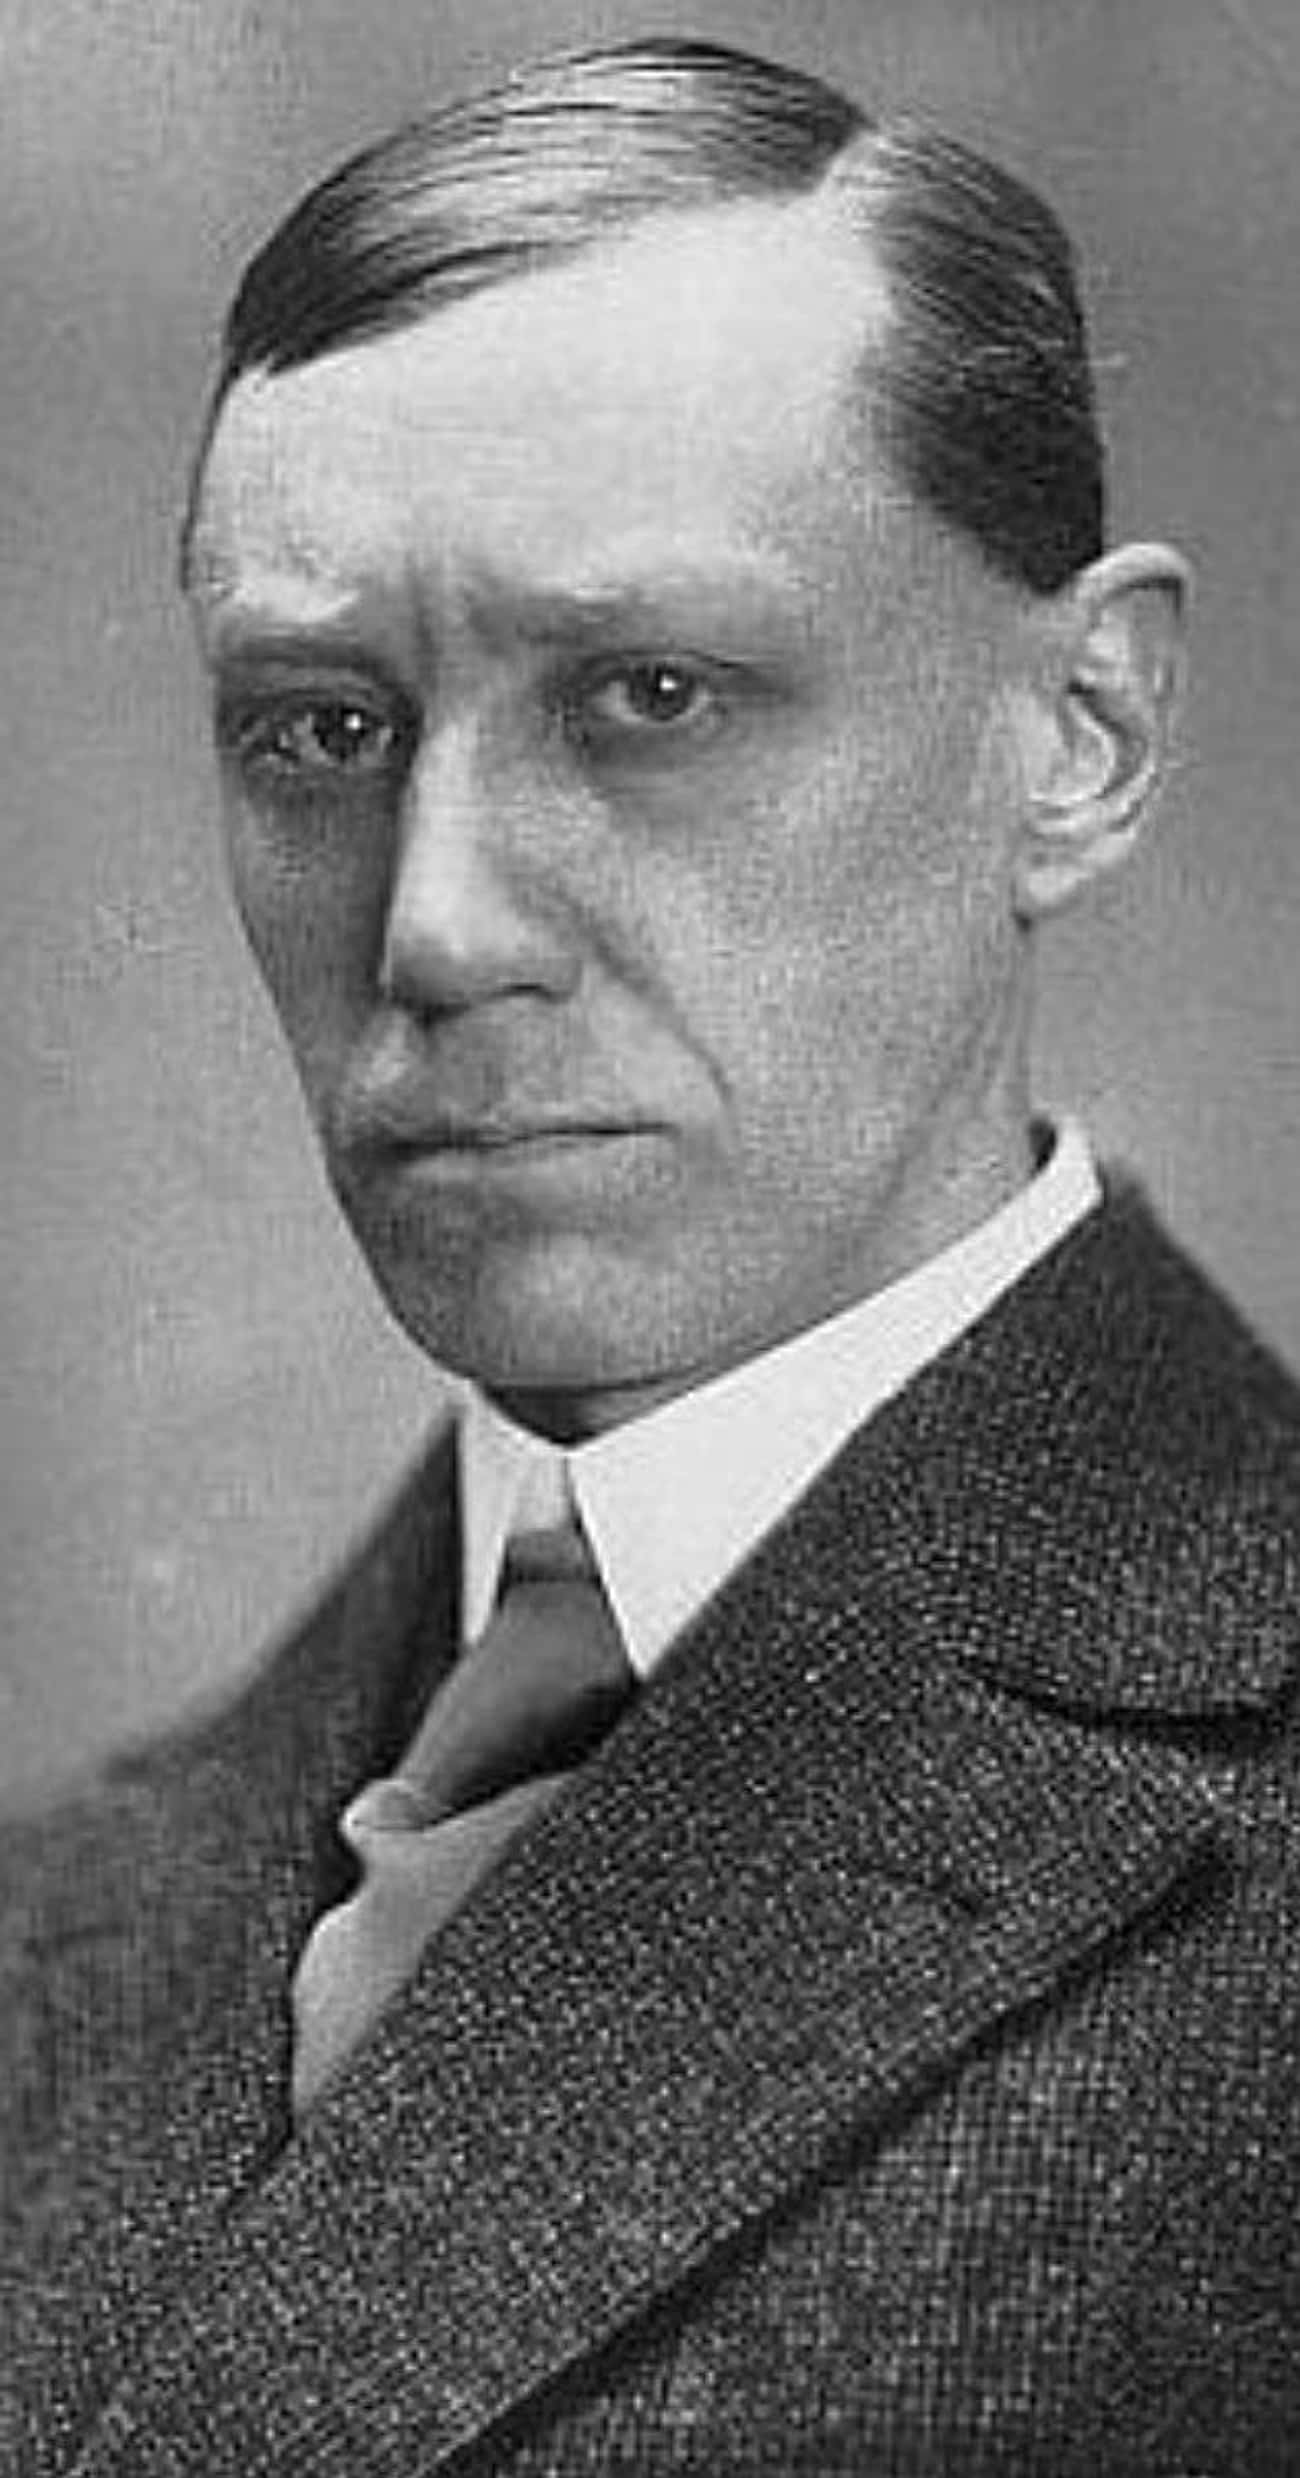 It Plays On The Popular Myth That Actor Max Schreck Did Not Exist